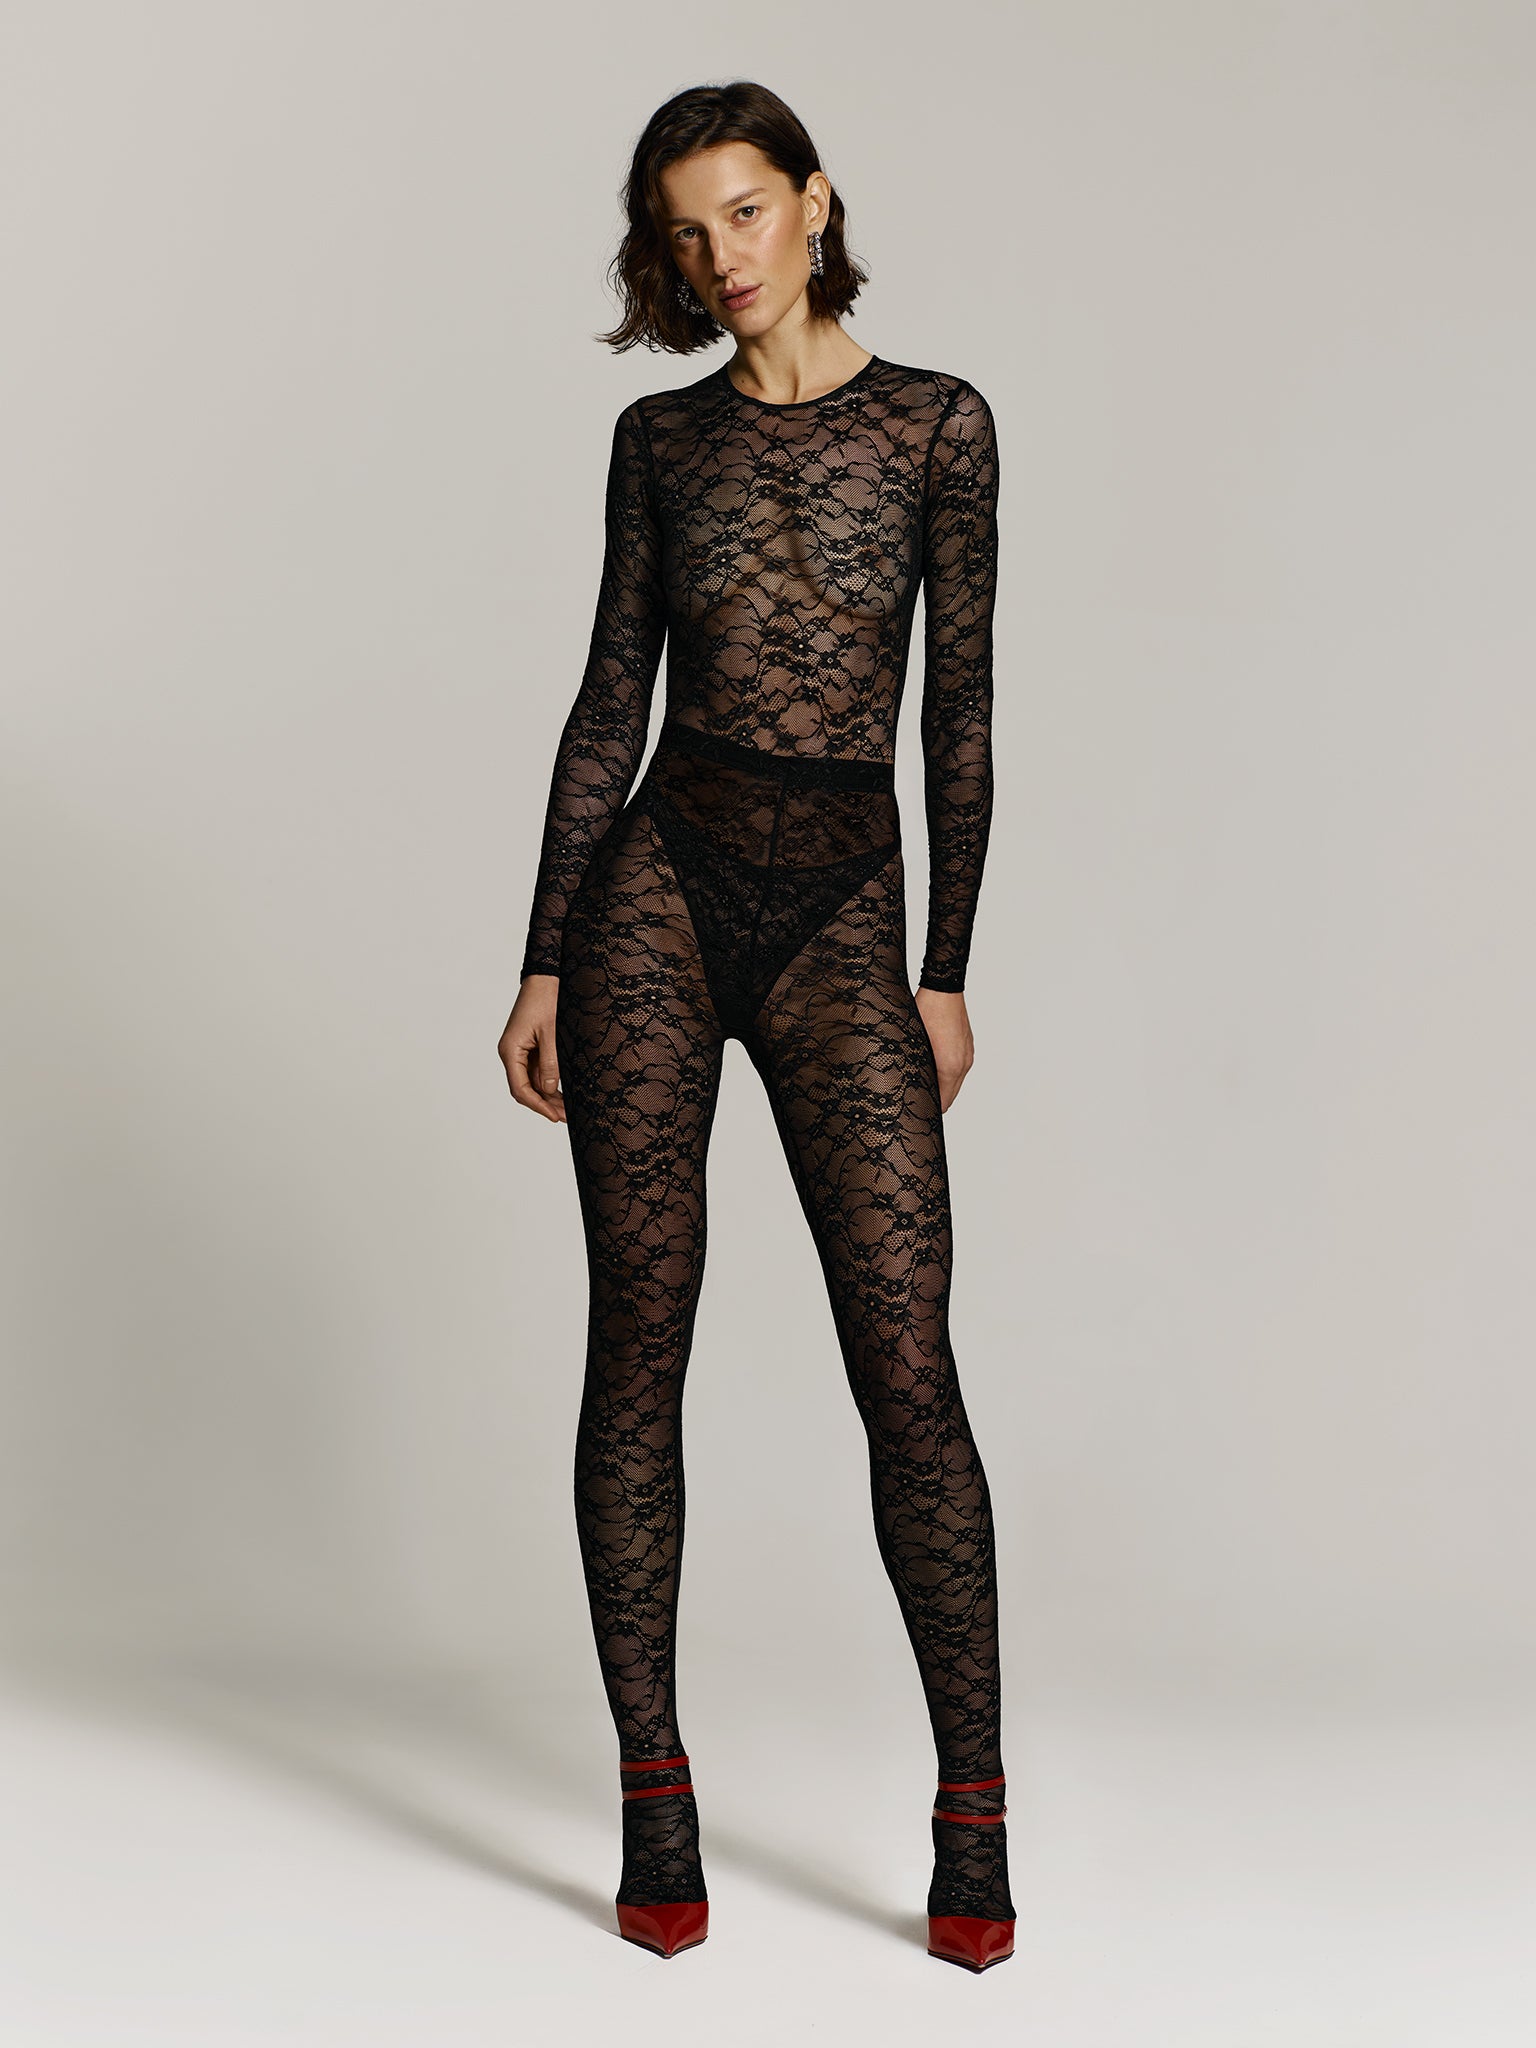 Full shot of a girl in a black lace long sleeved bodysuit, black lace high rise leggings and red high heels